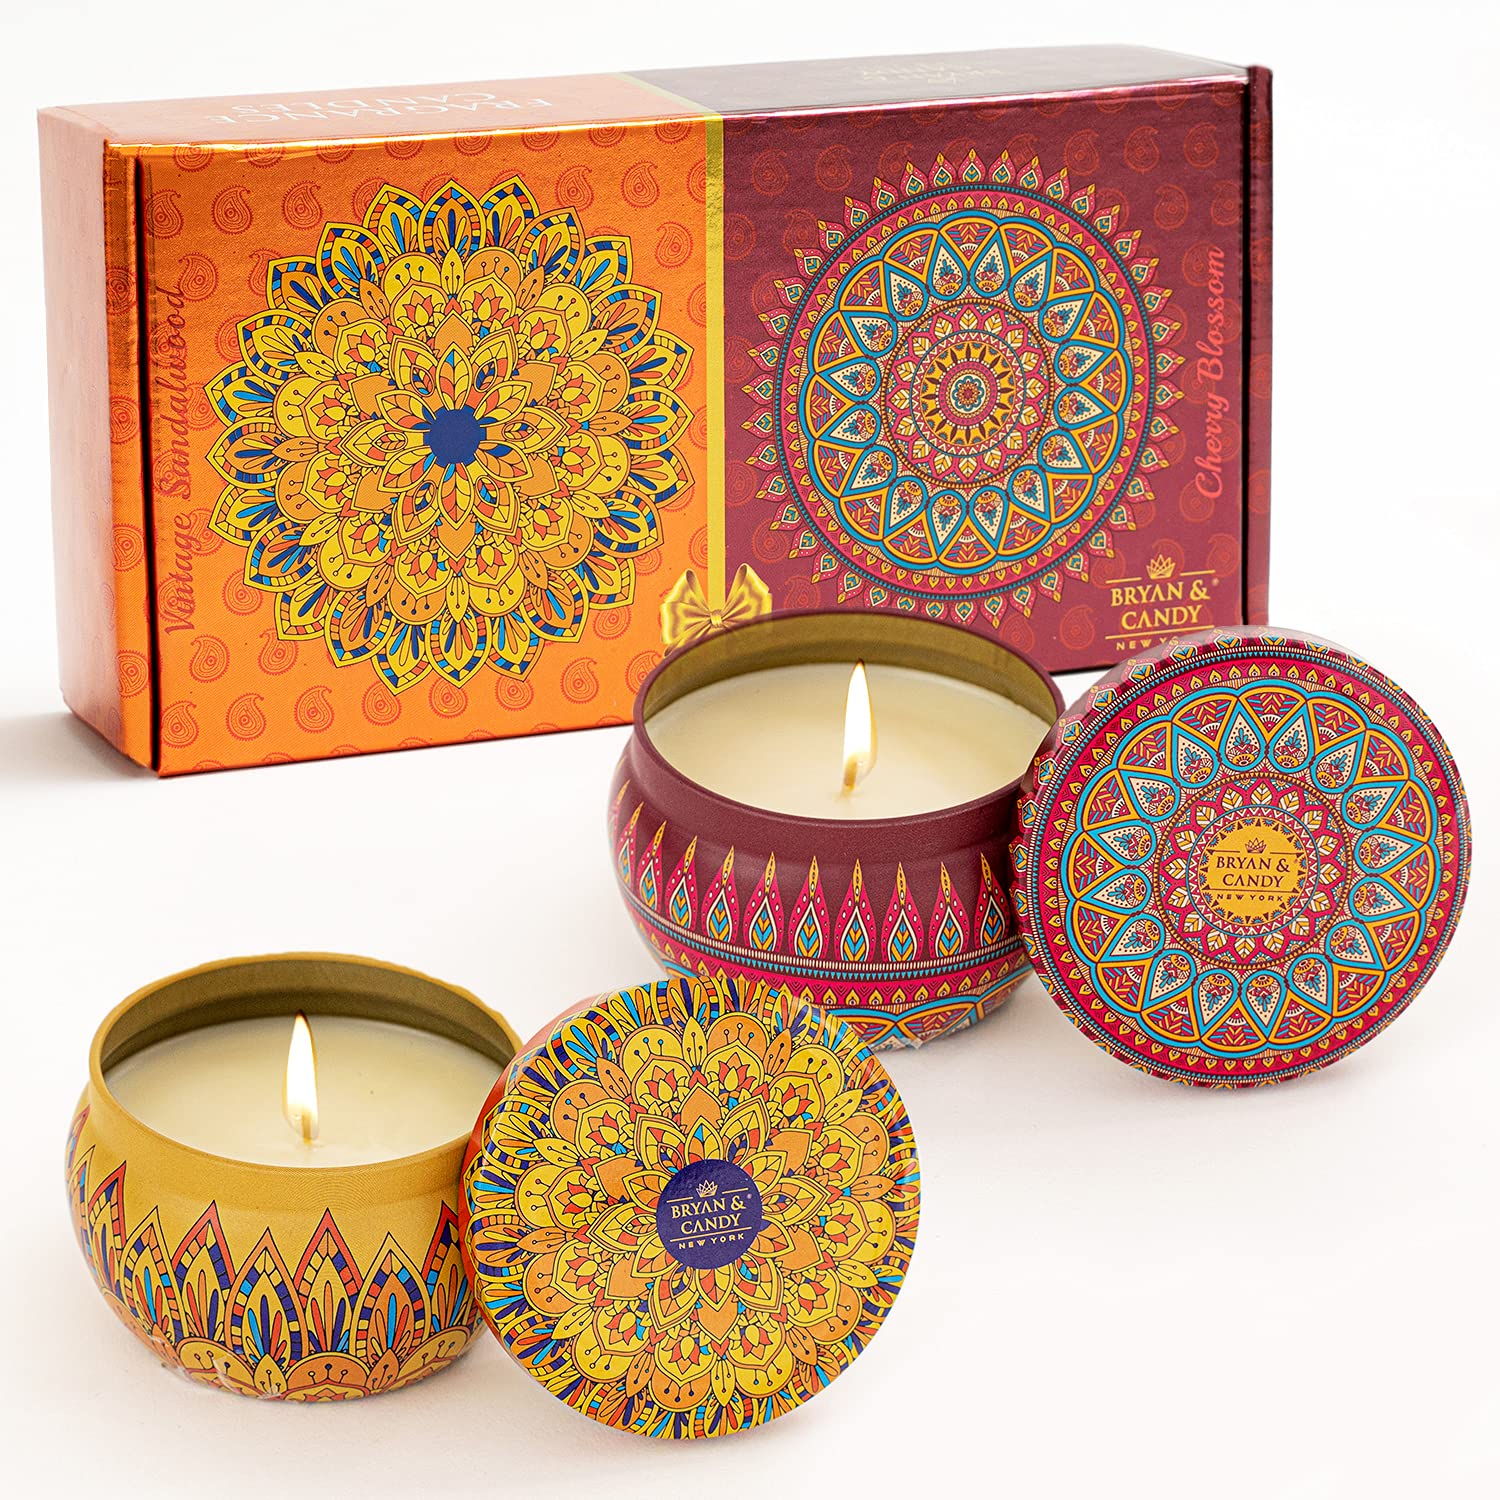 Bryan & Candy Scented Candles Gift Set for Women & Men